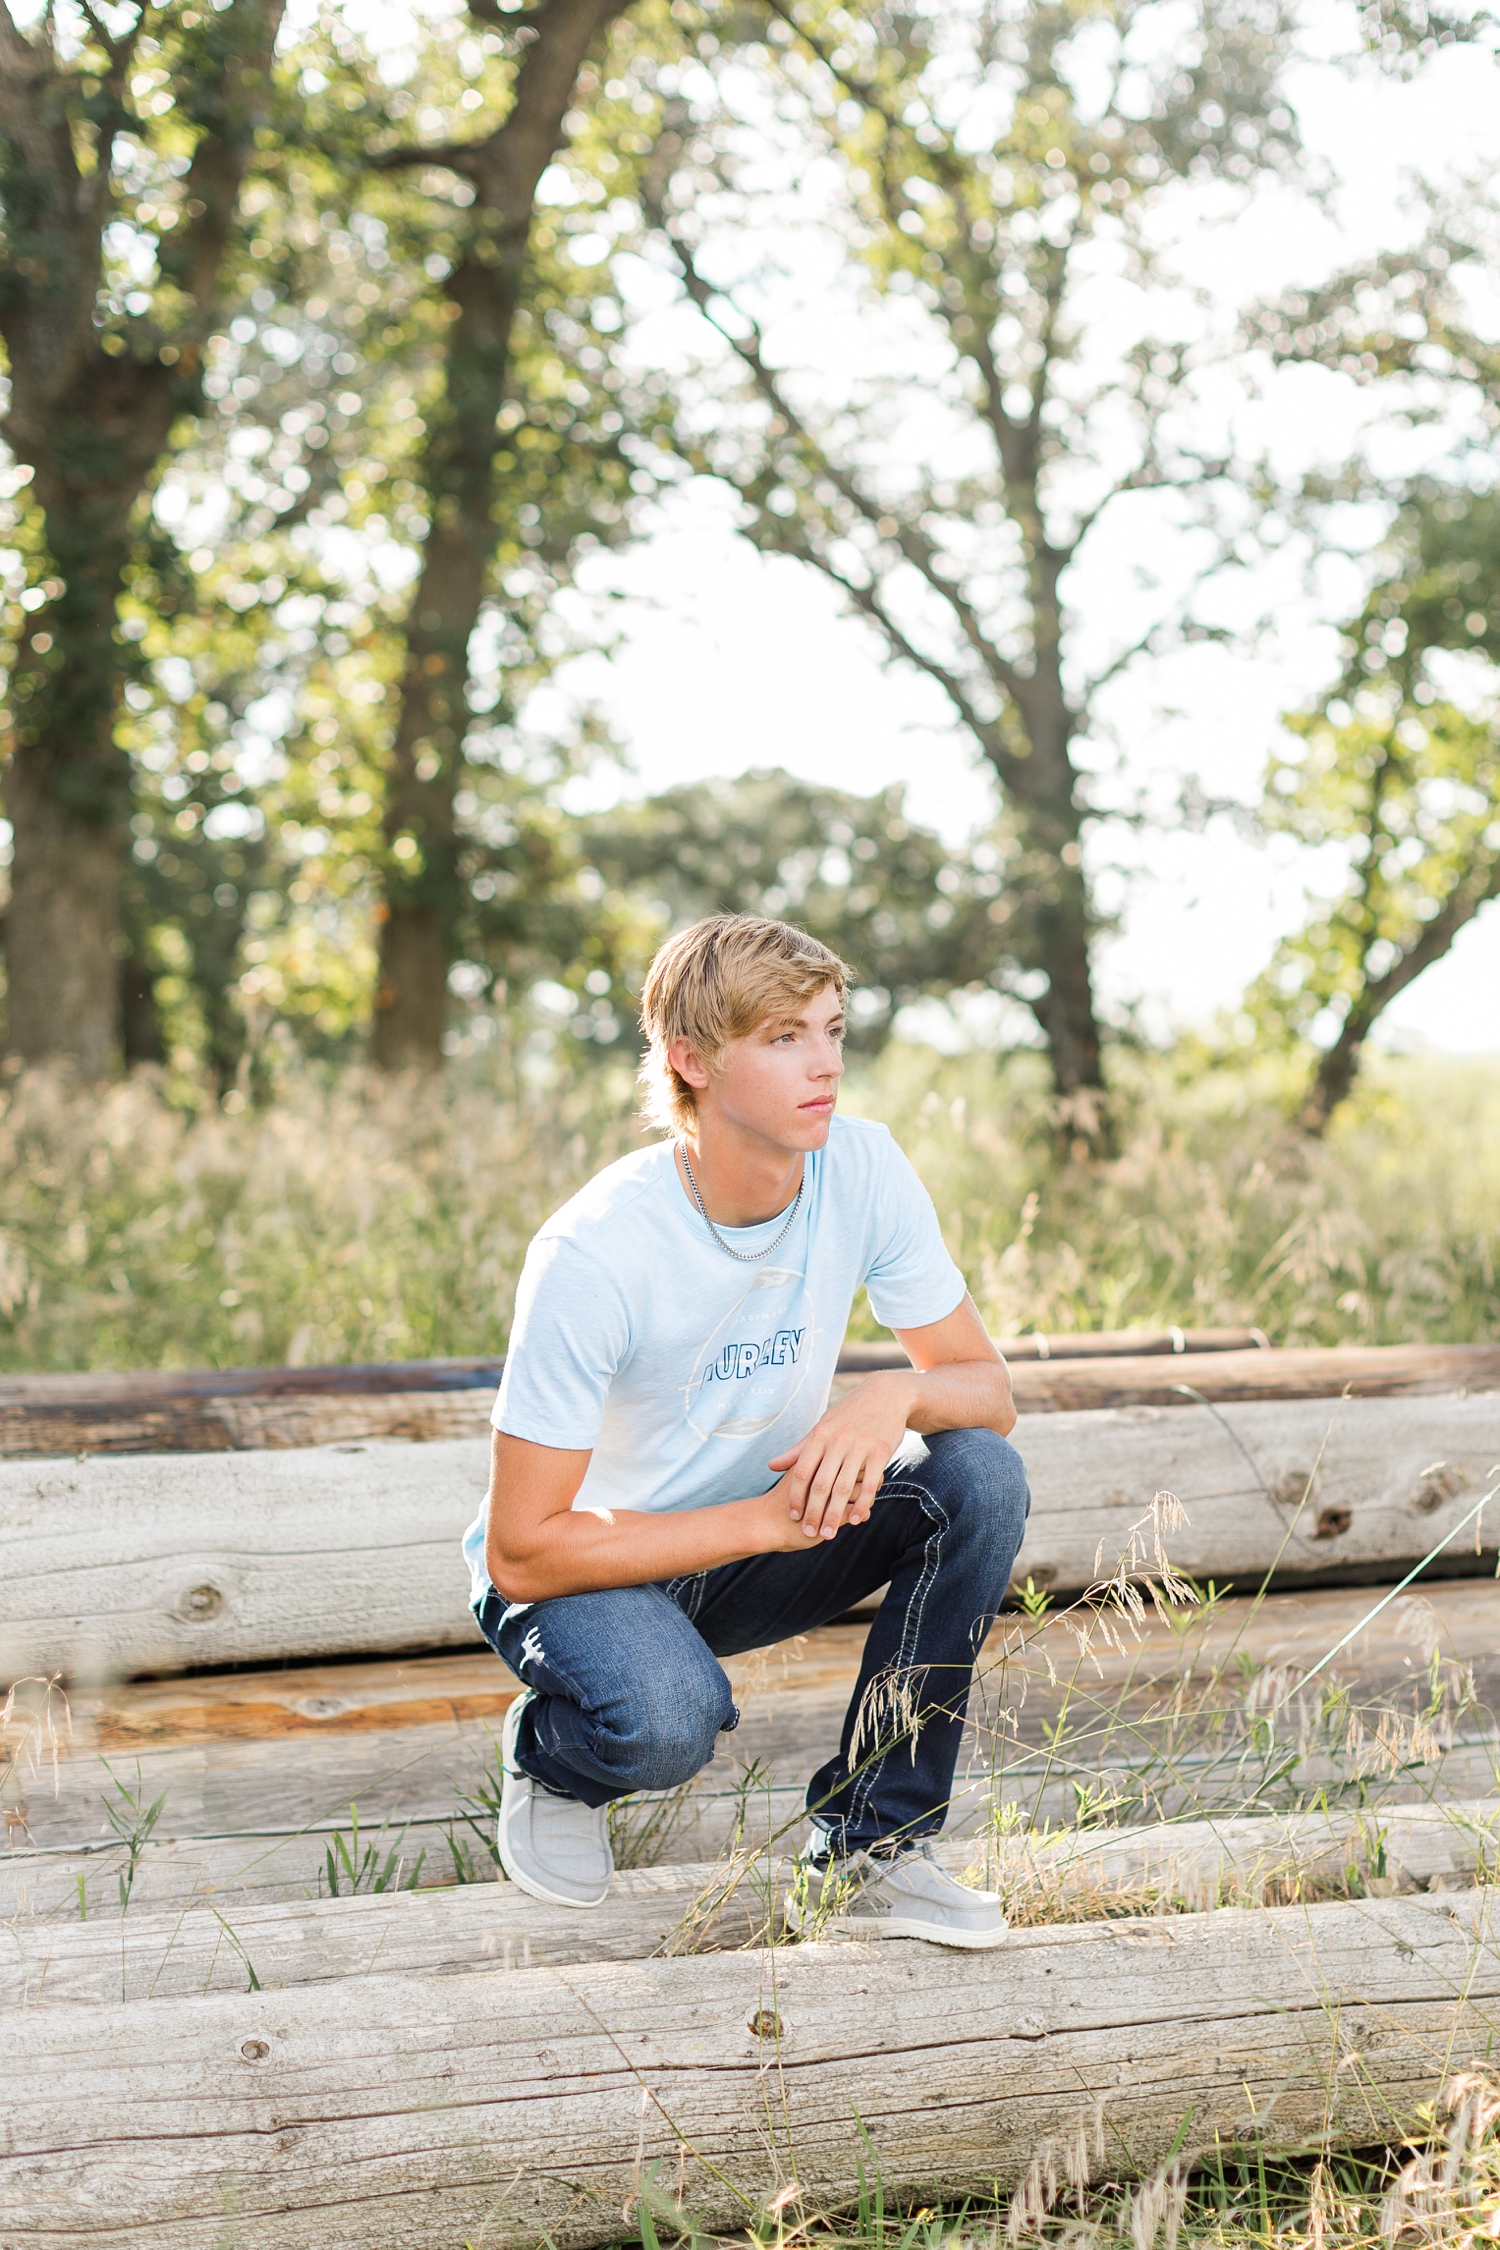 Justin squats on a stack of wood logs in the middle of a grassy field | CB Studio